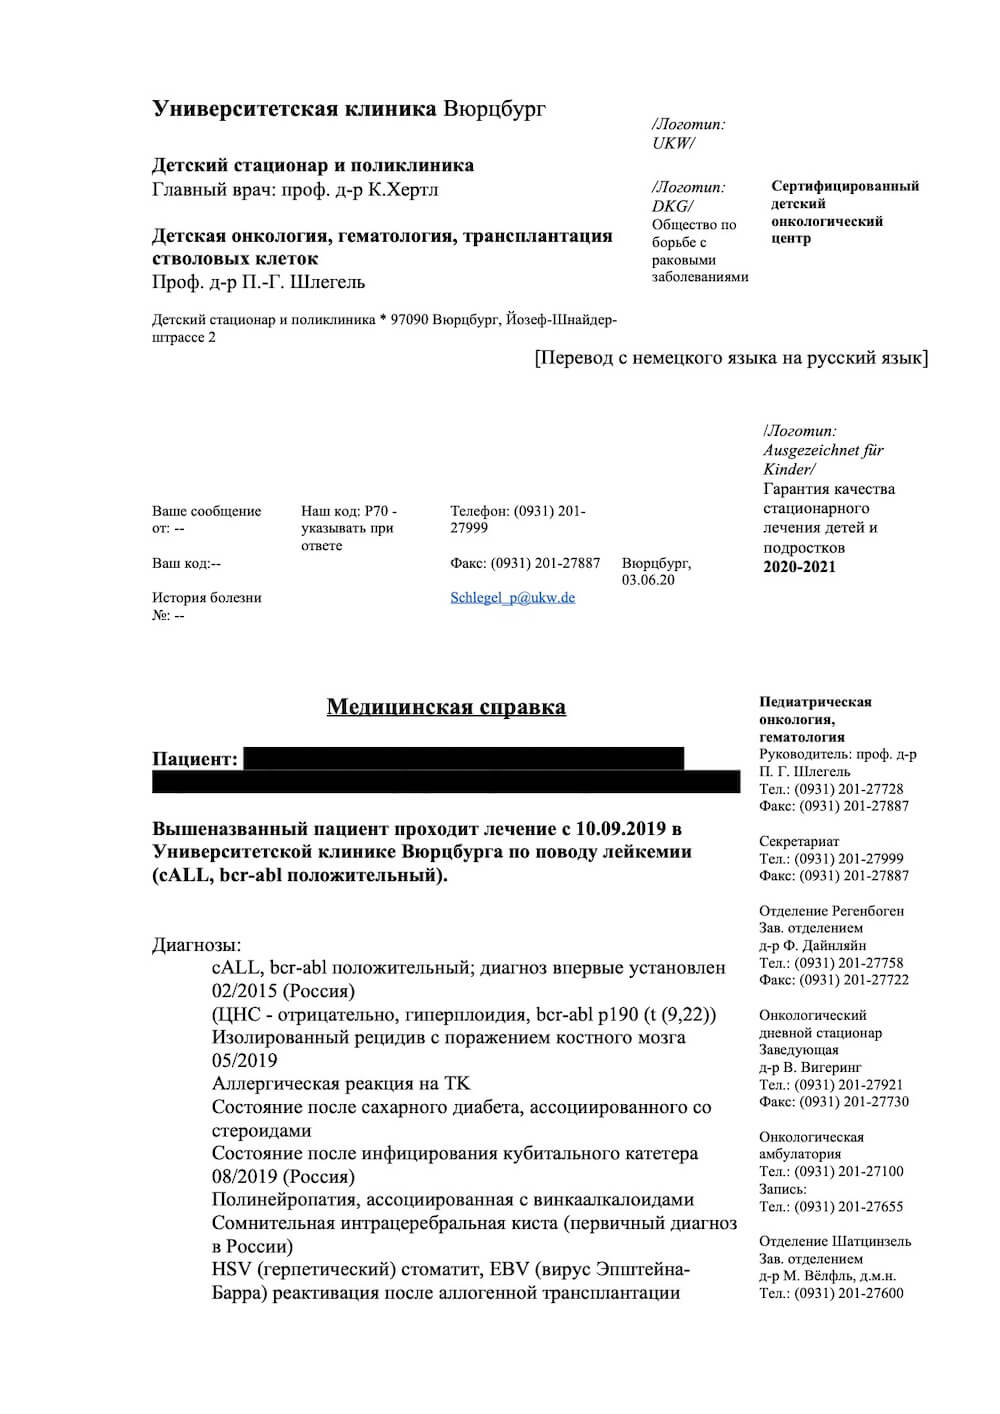 A medical certificate translated from German into Russian (page 1)